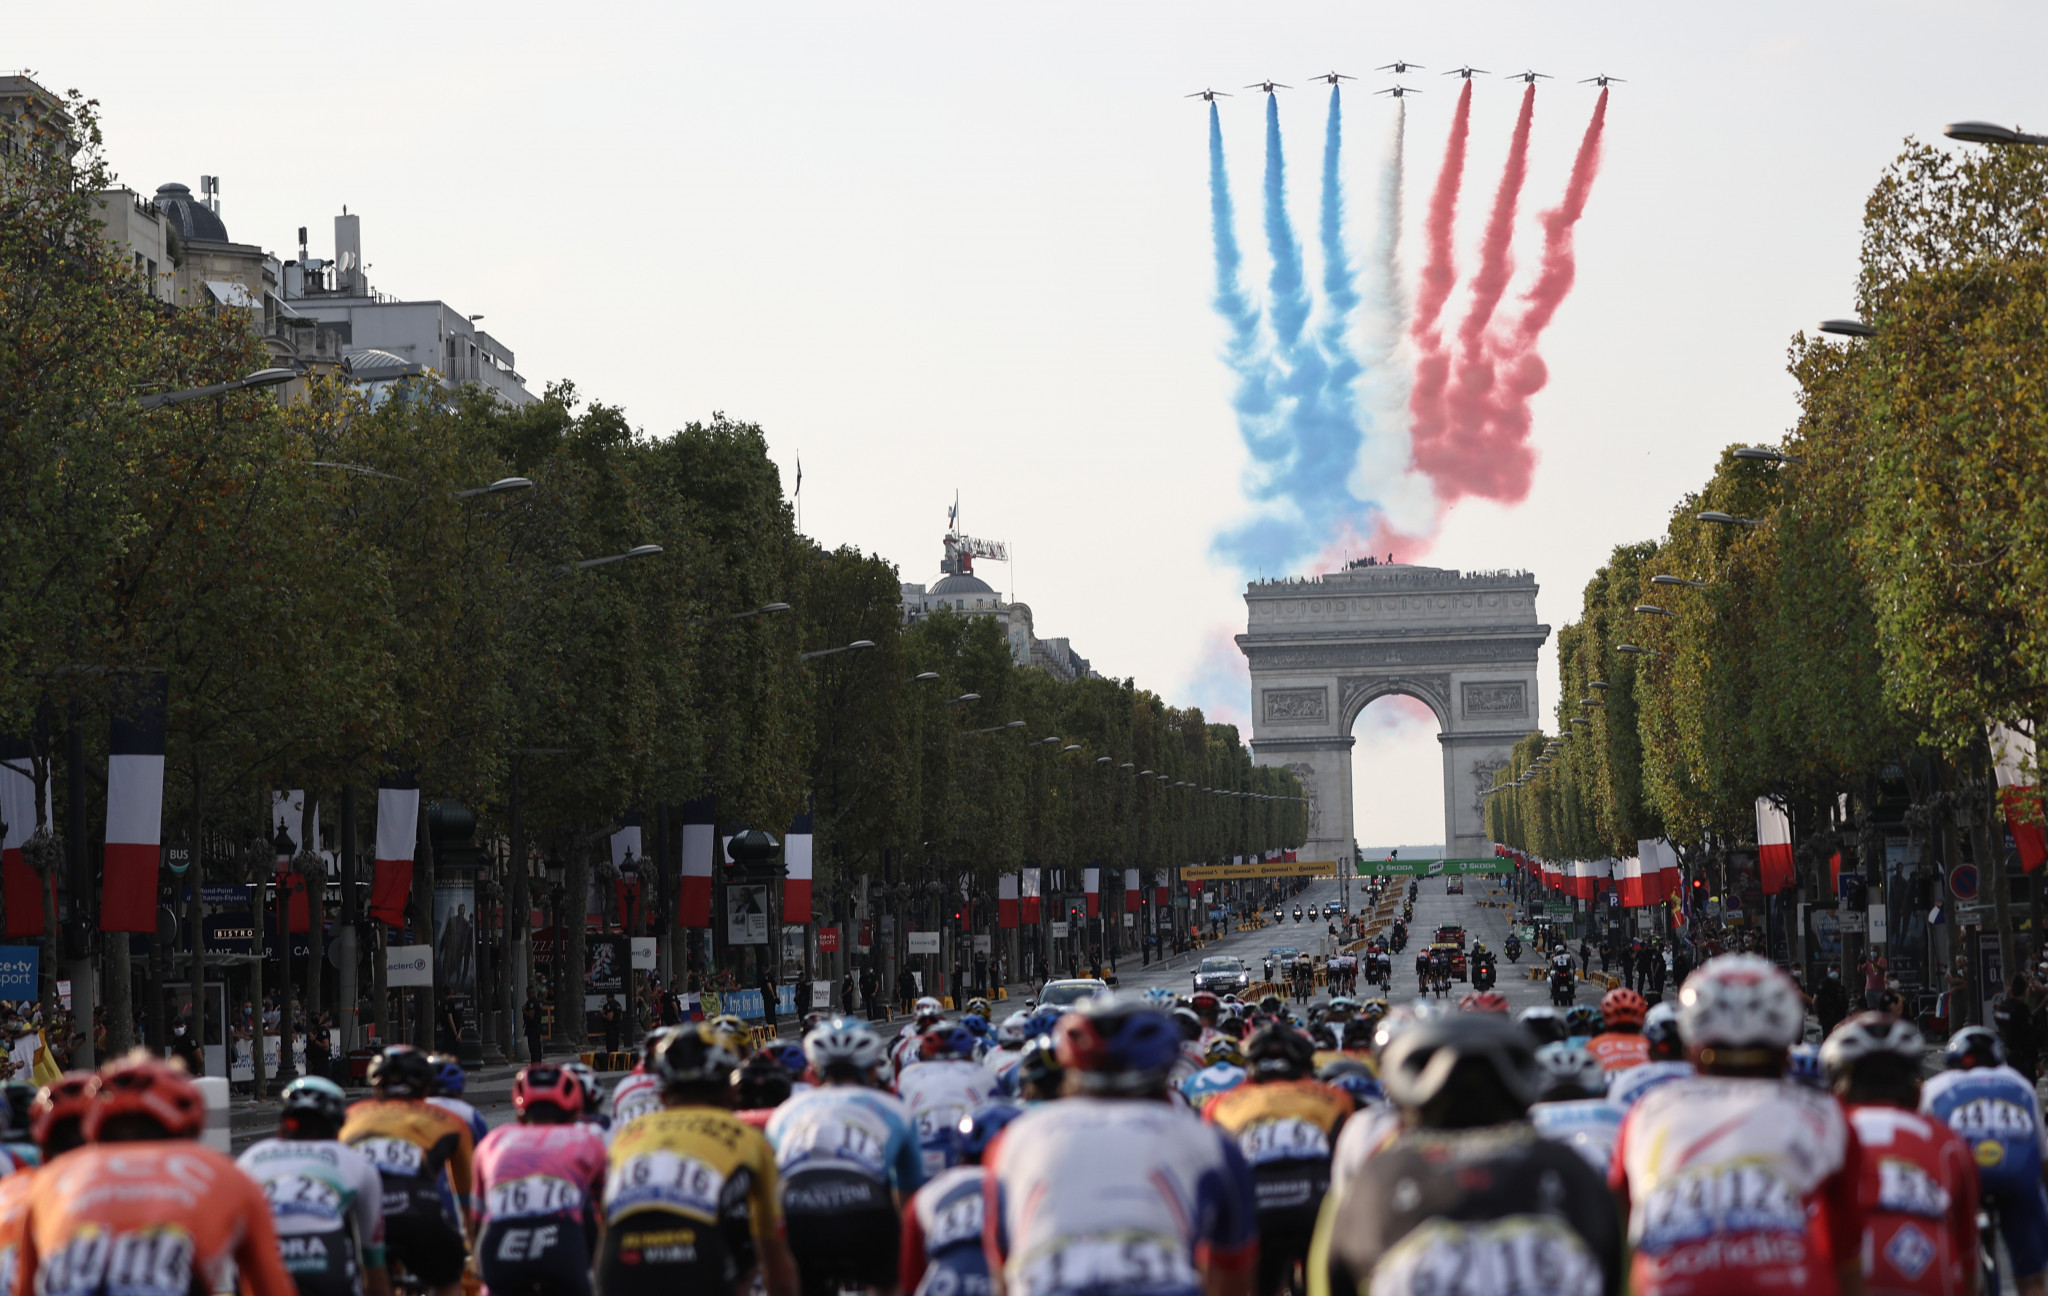 Riders are likely to be required to be vaccinated to compete at the Tour de France and Tour de France Femmes ©Getty Images